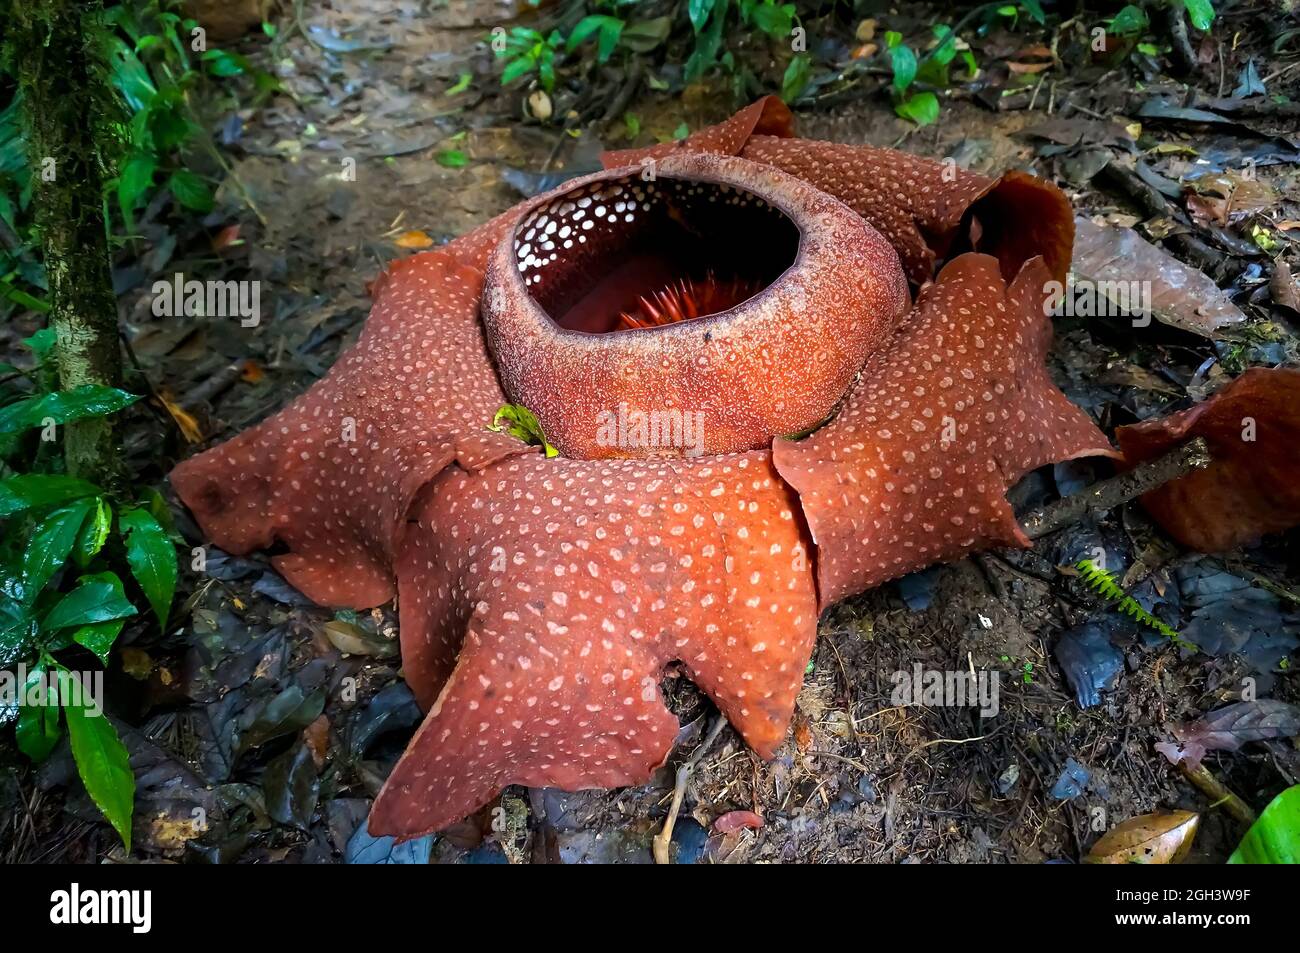 rafflesia - the world's largest flower. rare beautiful red flower in the jungle. Stock Photo